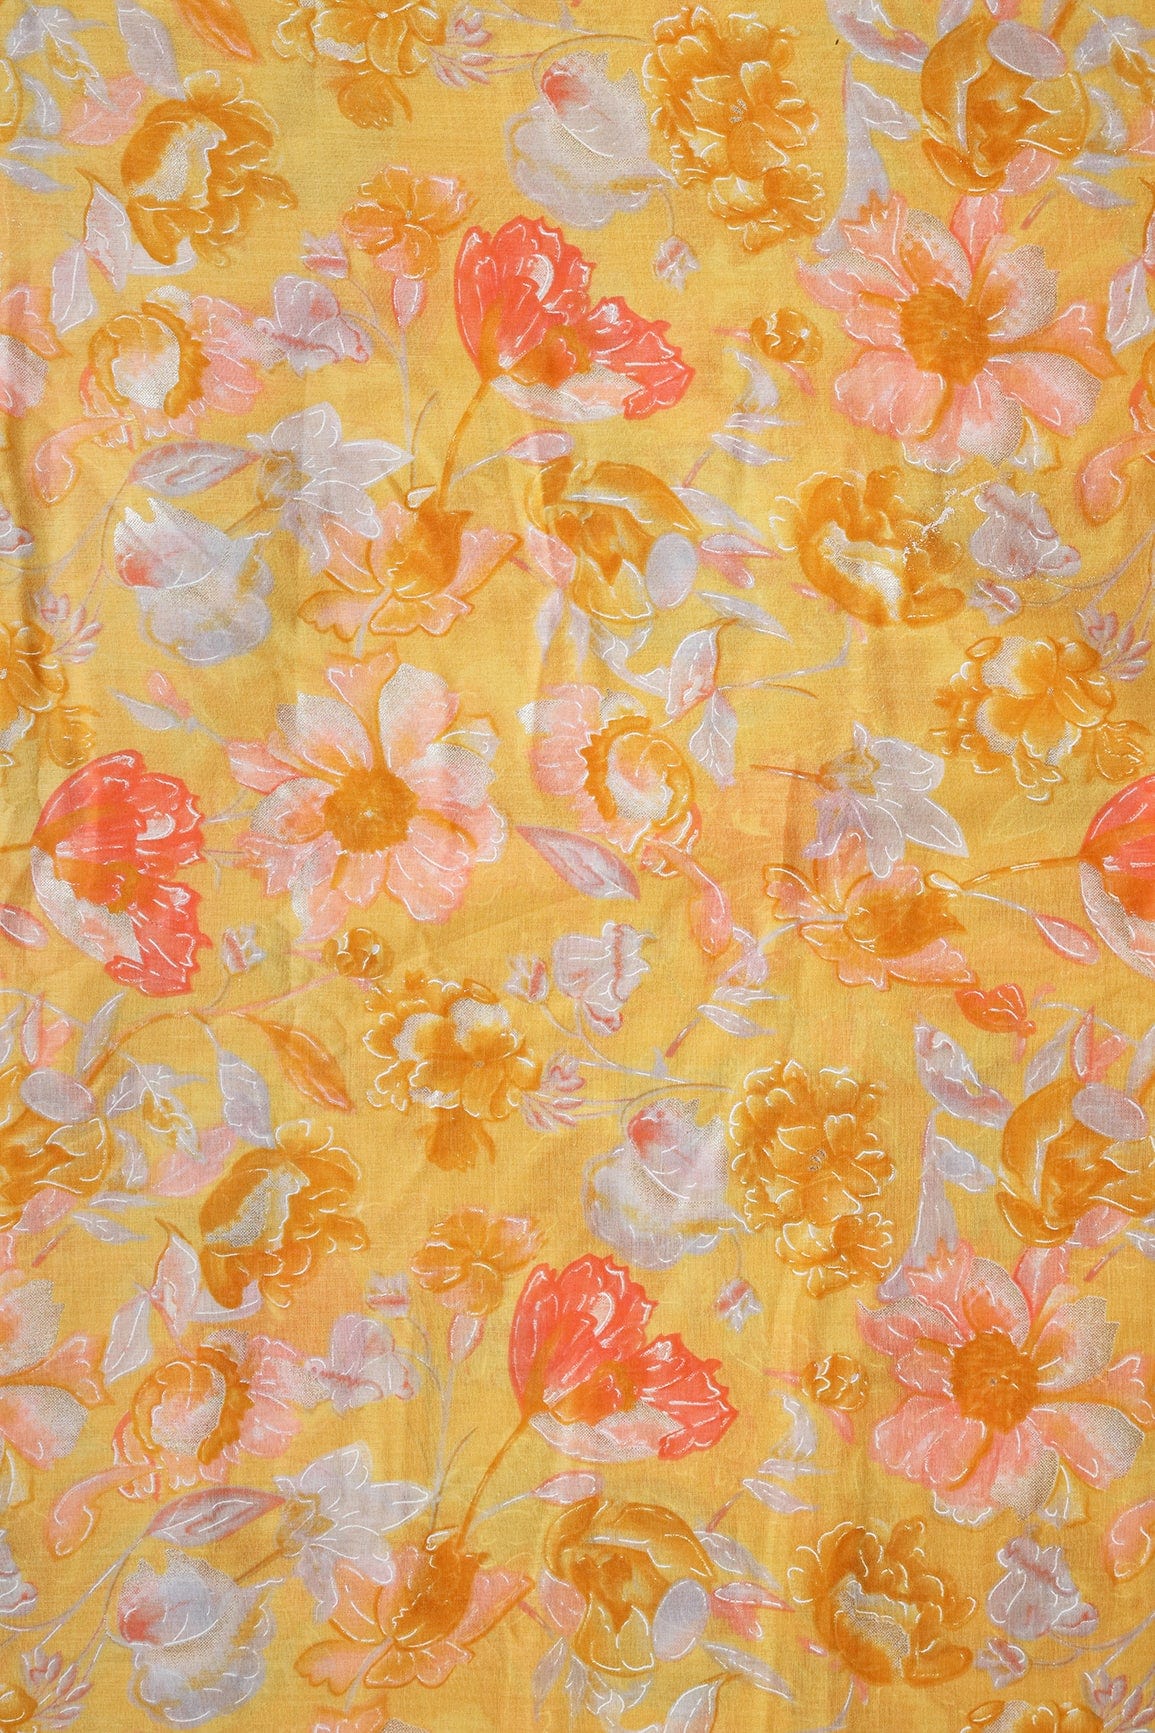 doeraa Prints Pink And Grey Floral Foil Print On Yellow Pure Mul Cotton Fabric